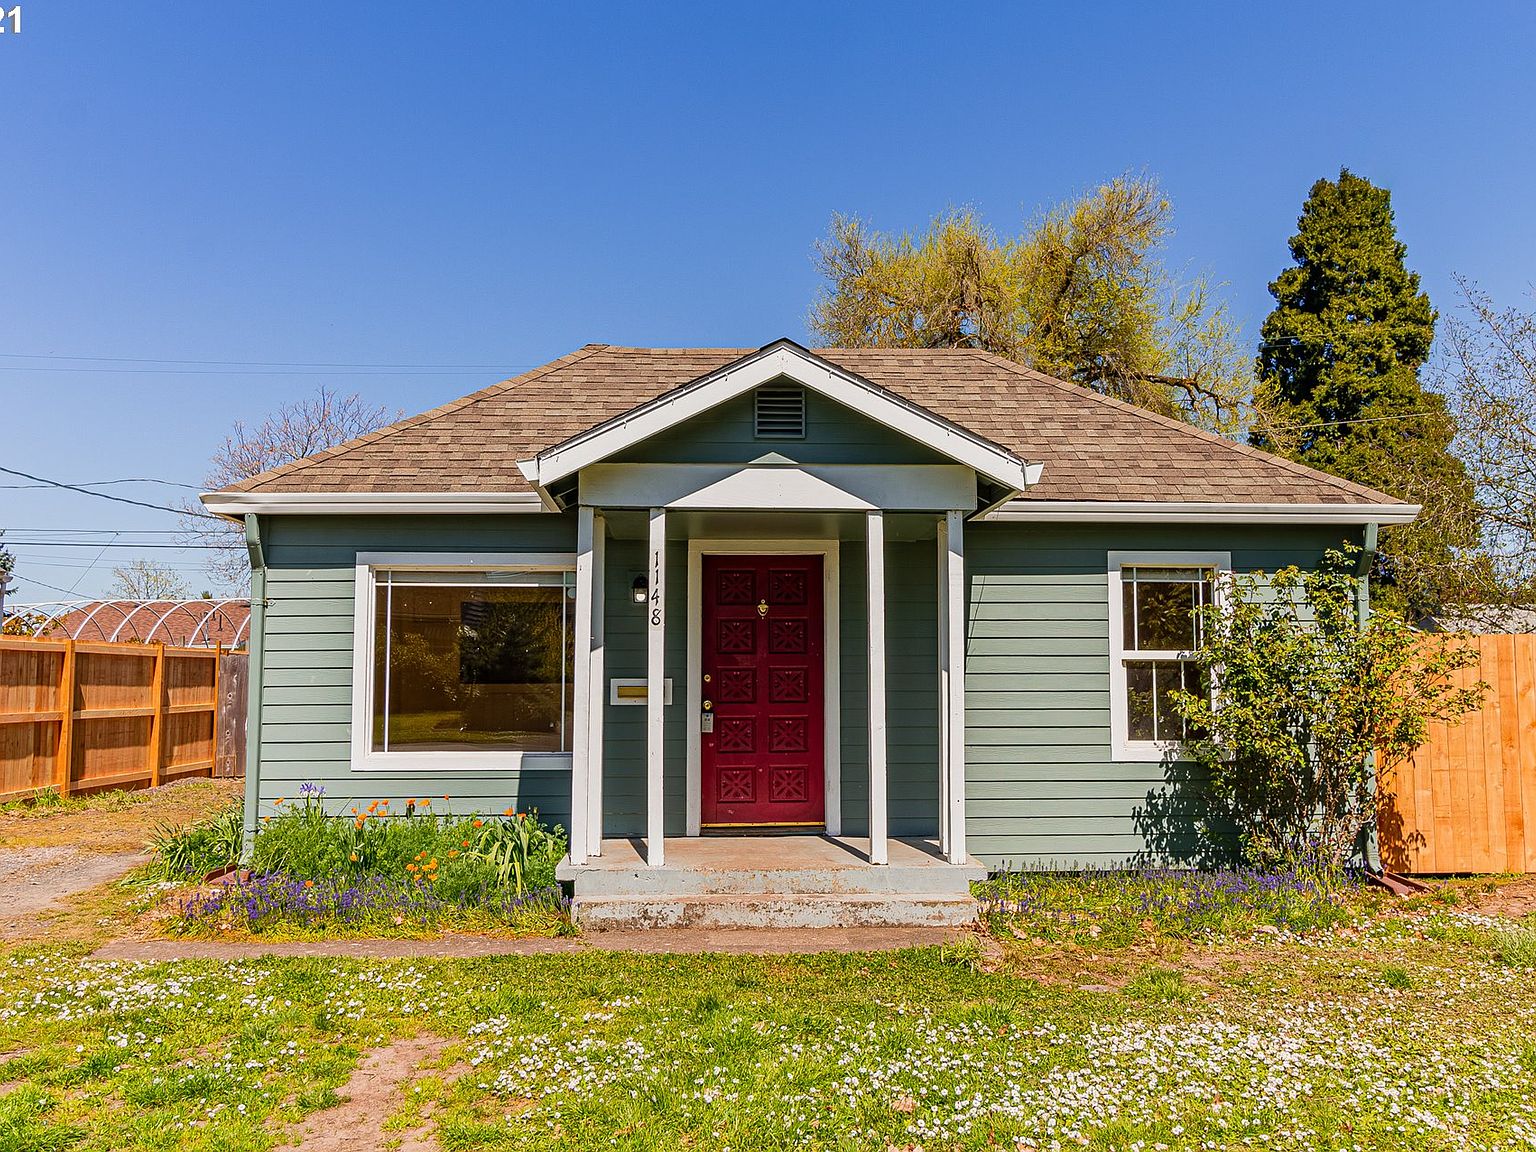 20 L St, Springfield, OR 20   MLS 20   Zillow